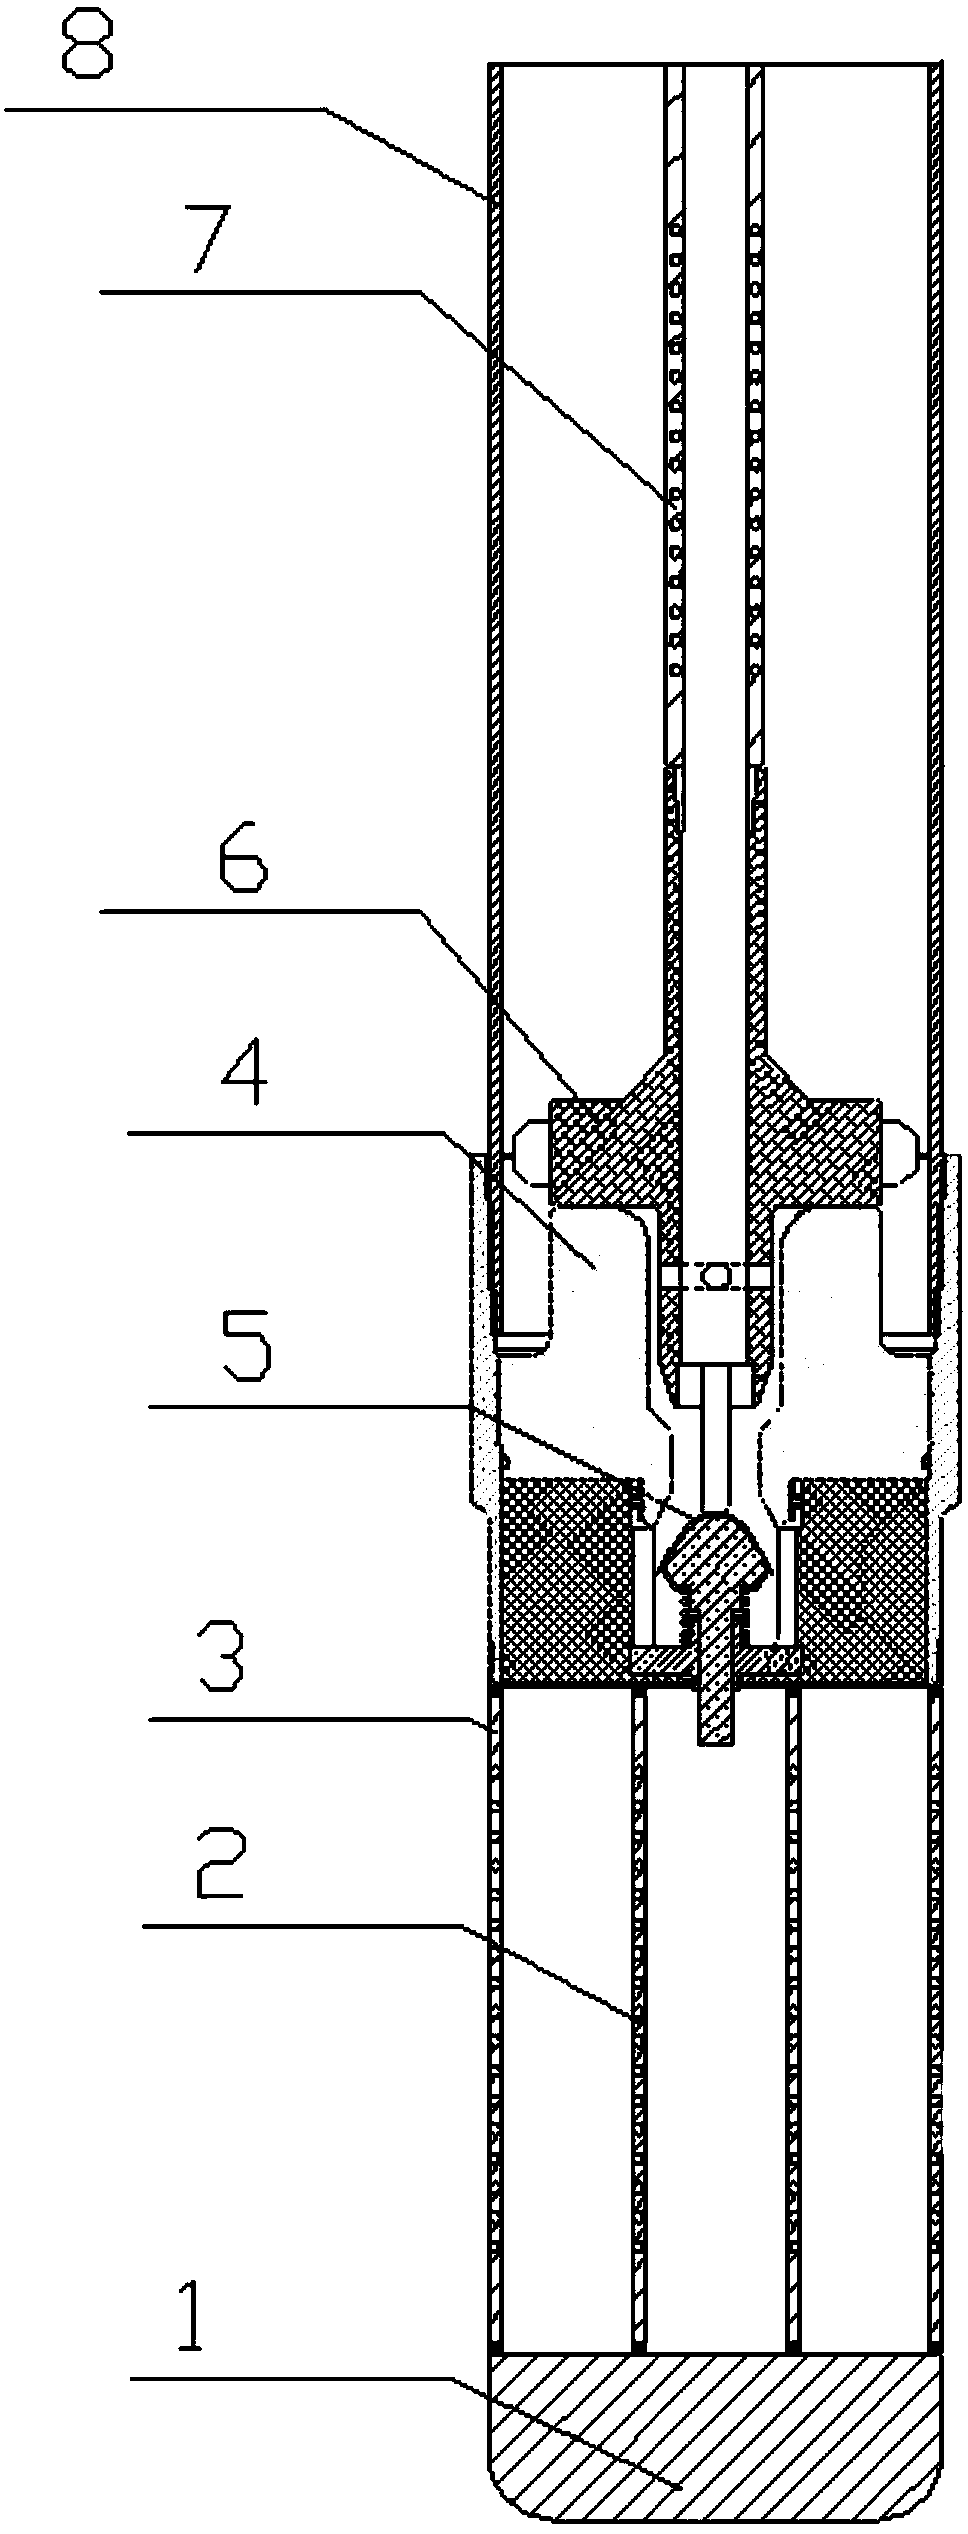 Bottom grout injection system and method suitable for deep well grounding electrode feed bar